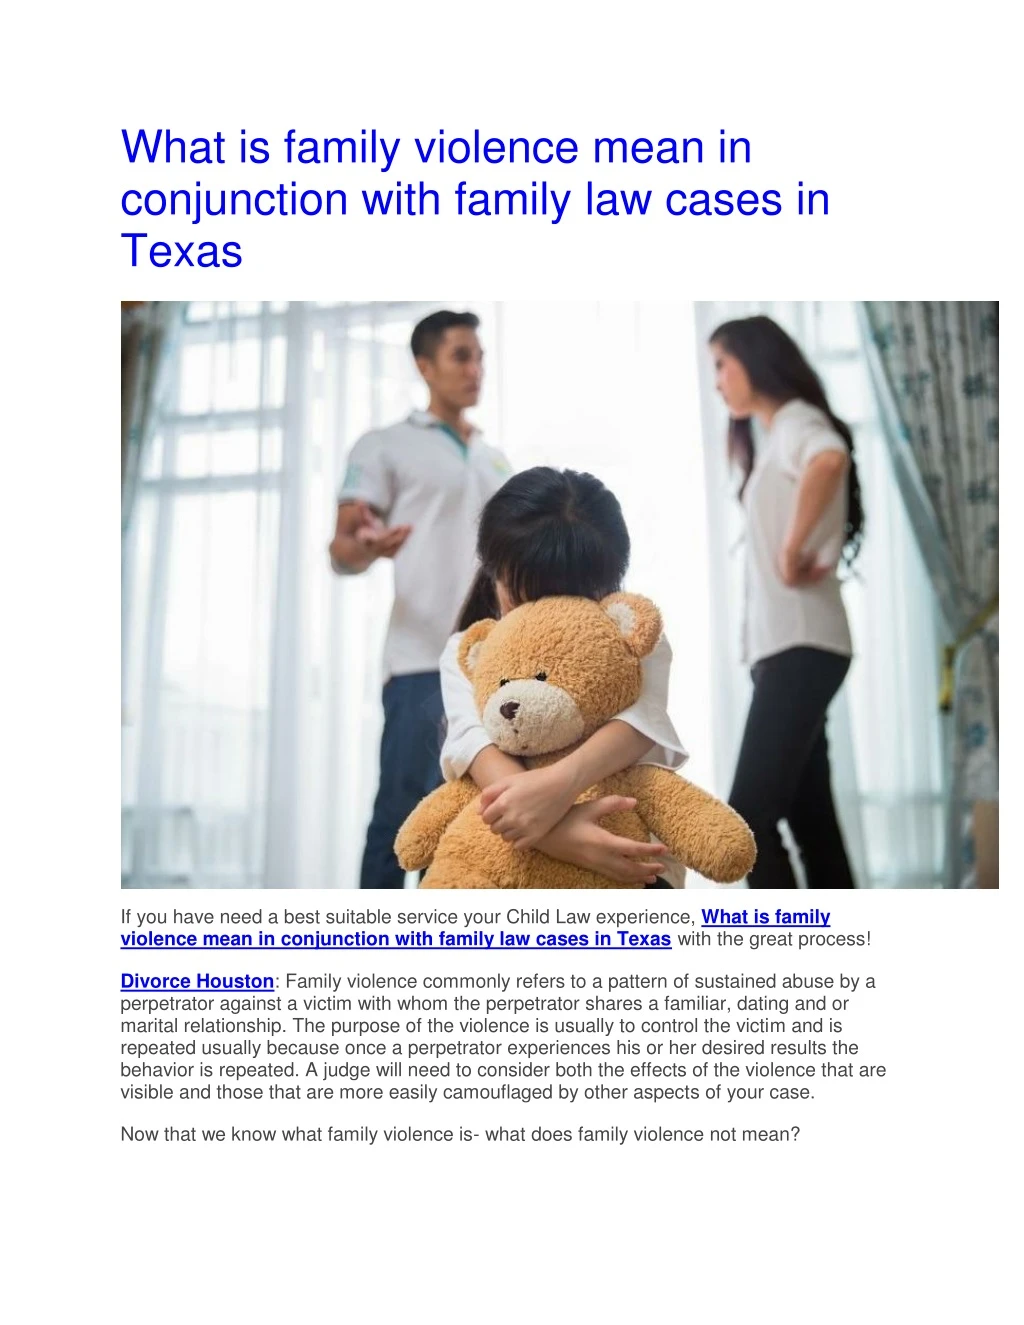 what is family violence mean in conjunction with